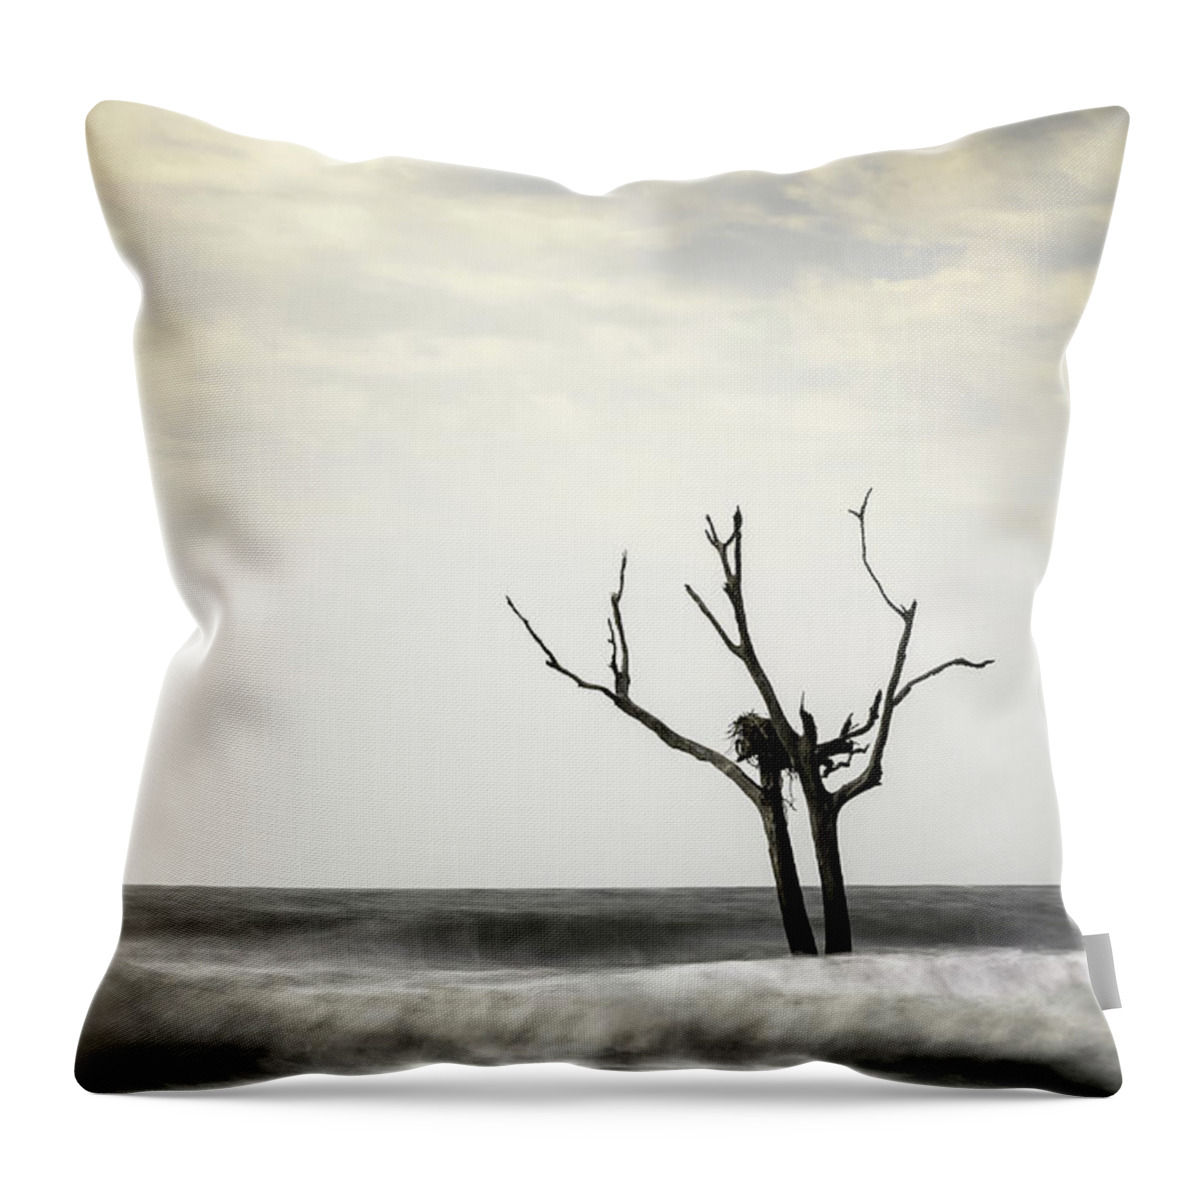 Bulls Island Throw Pillow featuring the photograph Nesting by Ivo Kerssemakers